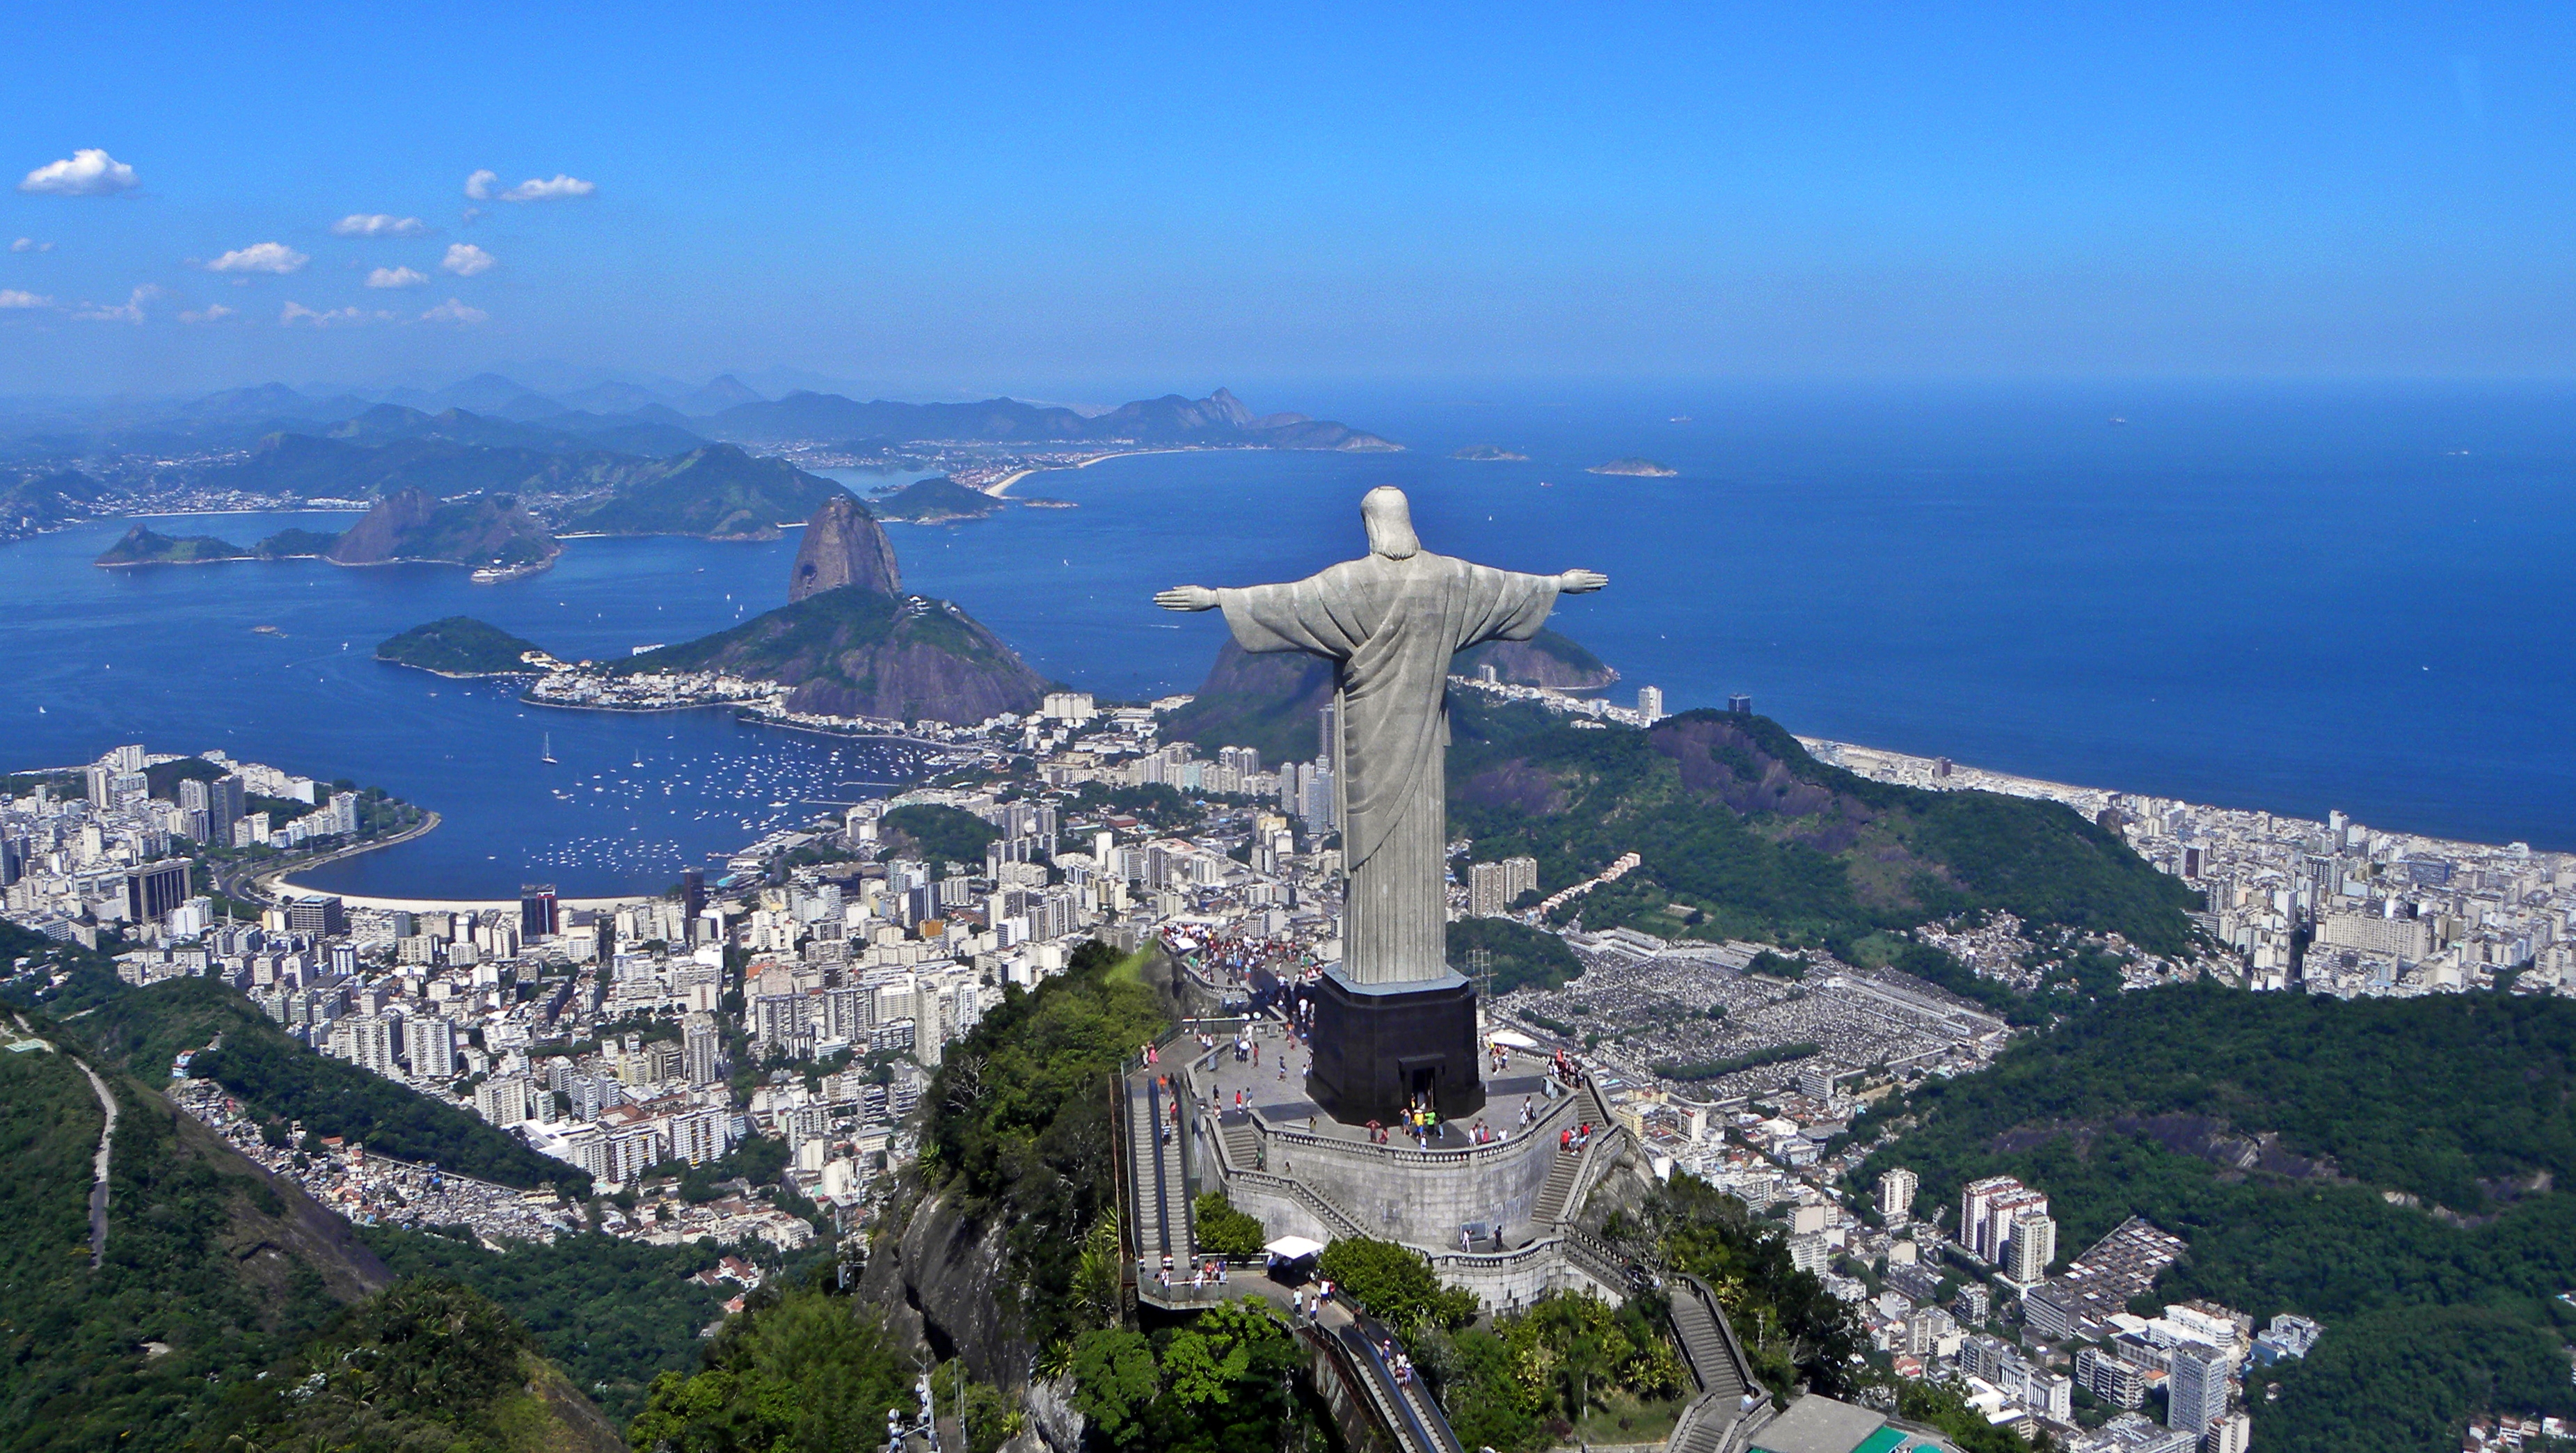 The Christ the Redeemer statue atop Mount Corcovado in Rio de Janeiro, photographed in February 2010. Police in Rio seek the arrest of six people accused of involvement in the theft of 16 artworks worth more than $139 million, taken from the widow of an art dealer-collector. Image courtesy of Wikimedia Commons, photo credit Artyominc. Shared under the Creative Commons Attribution Share-Alike 3.0 Unported license.